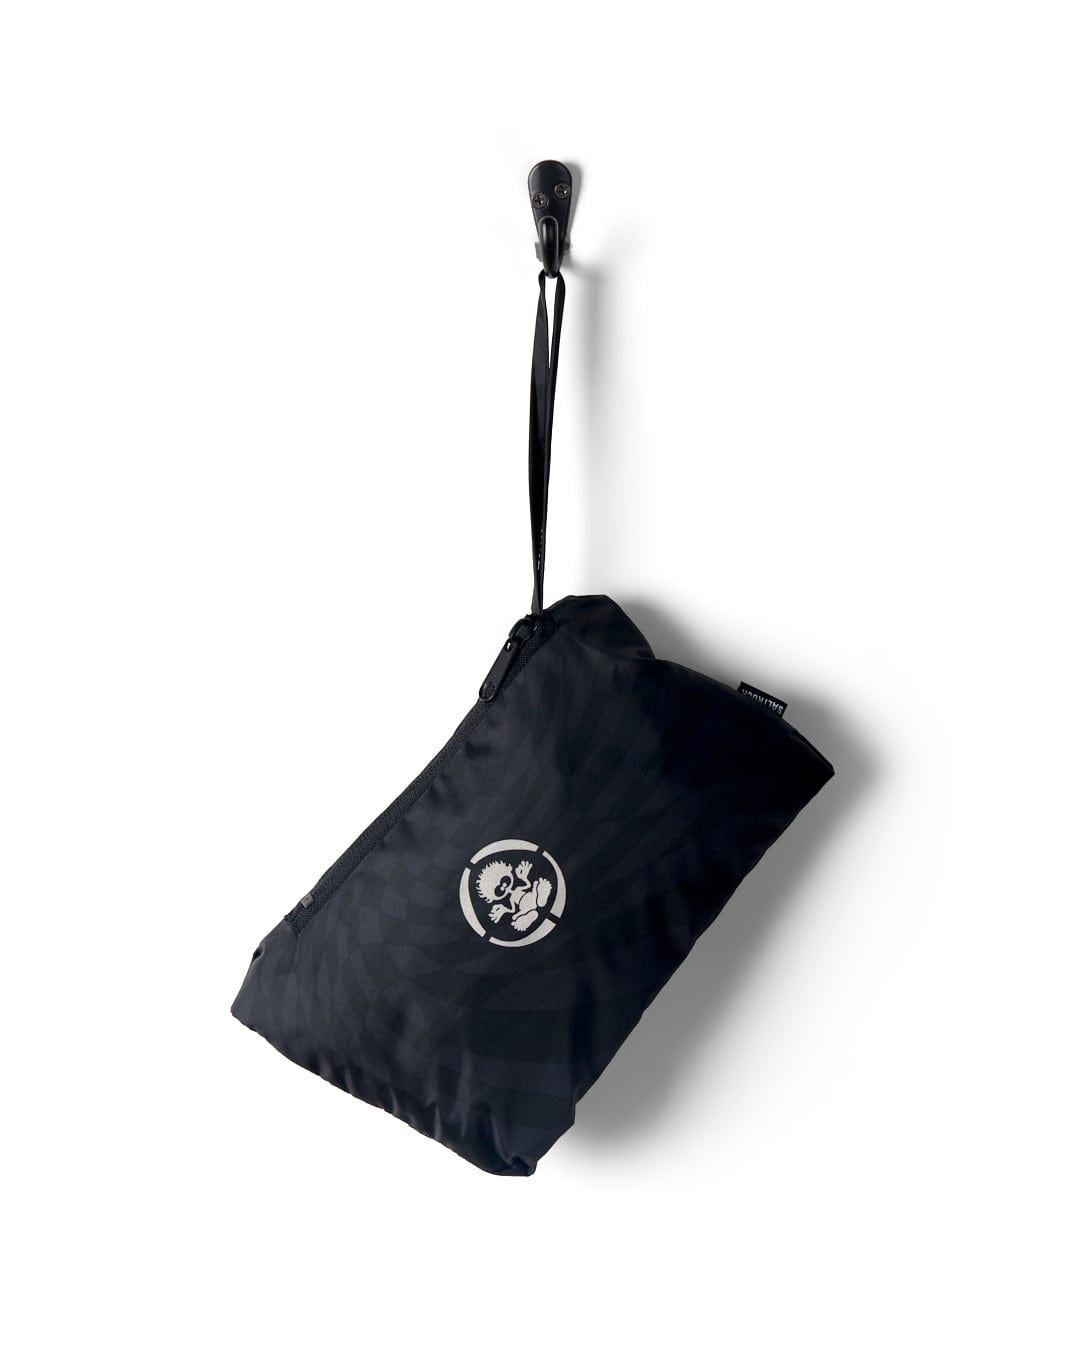 A black foldable umbrella with a white Saltrock logo, displayed closed and leaning diagonally on a white background.